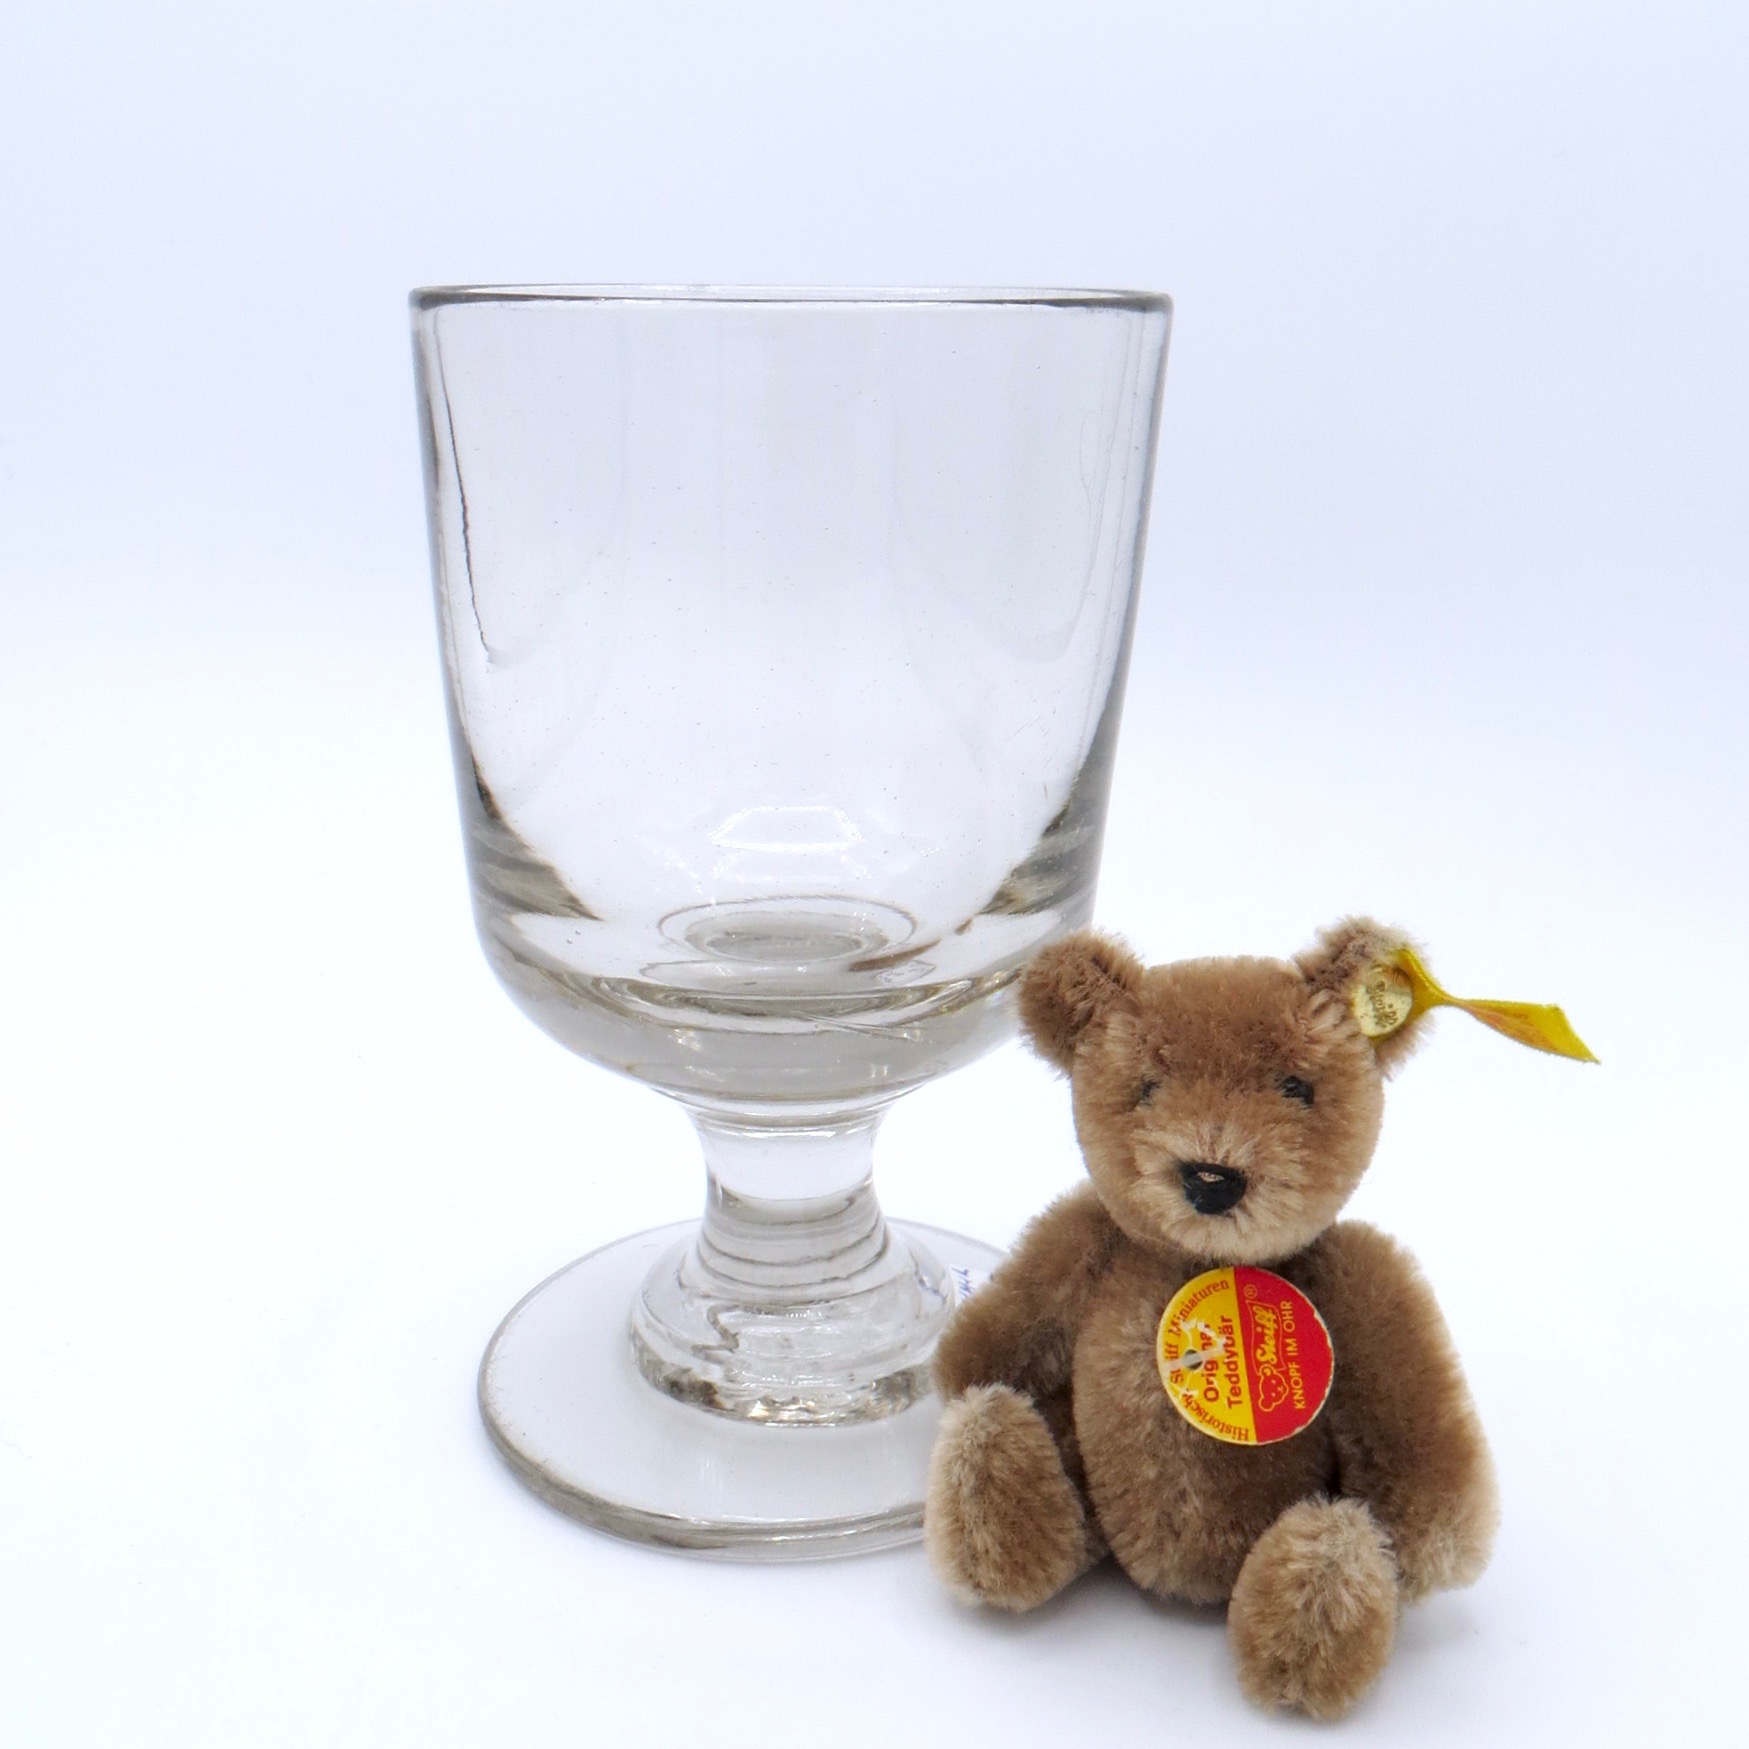 A large glass on the left, and a small teddy bear on the right for scale.